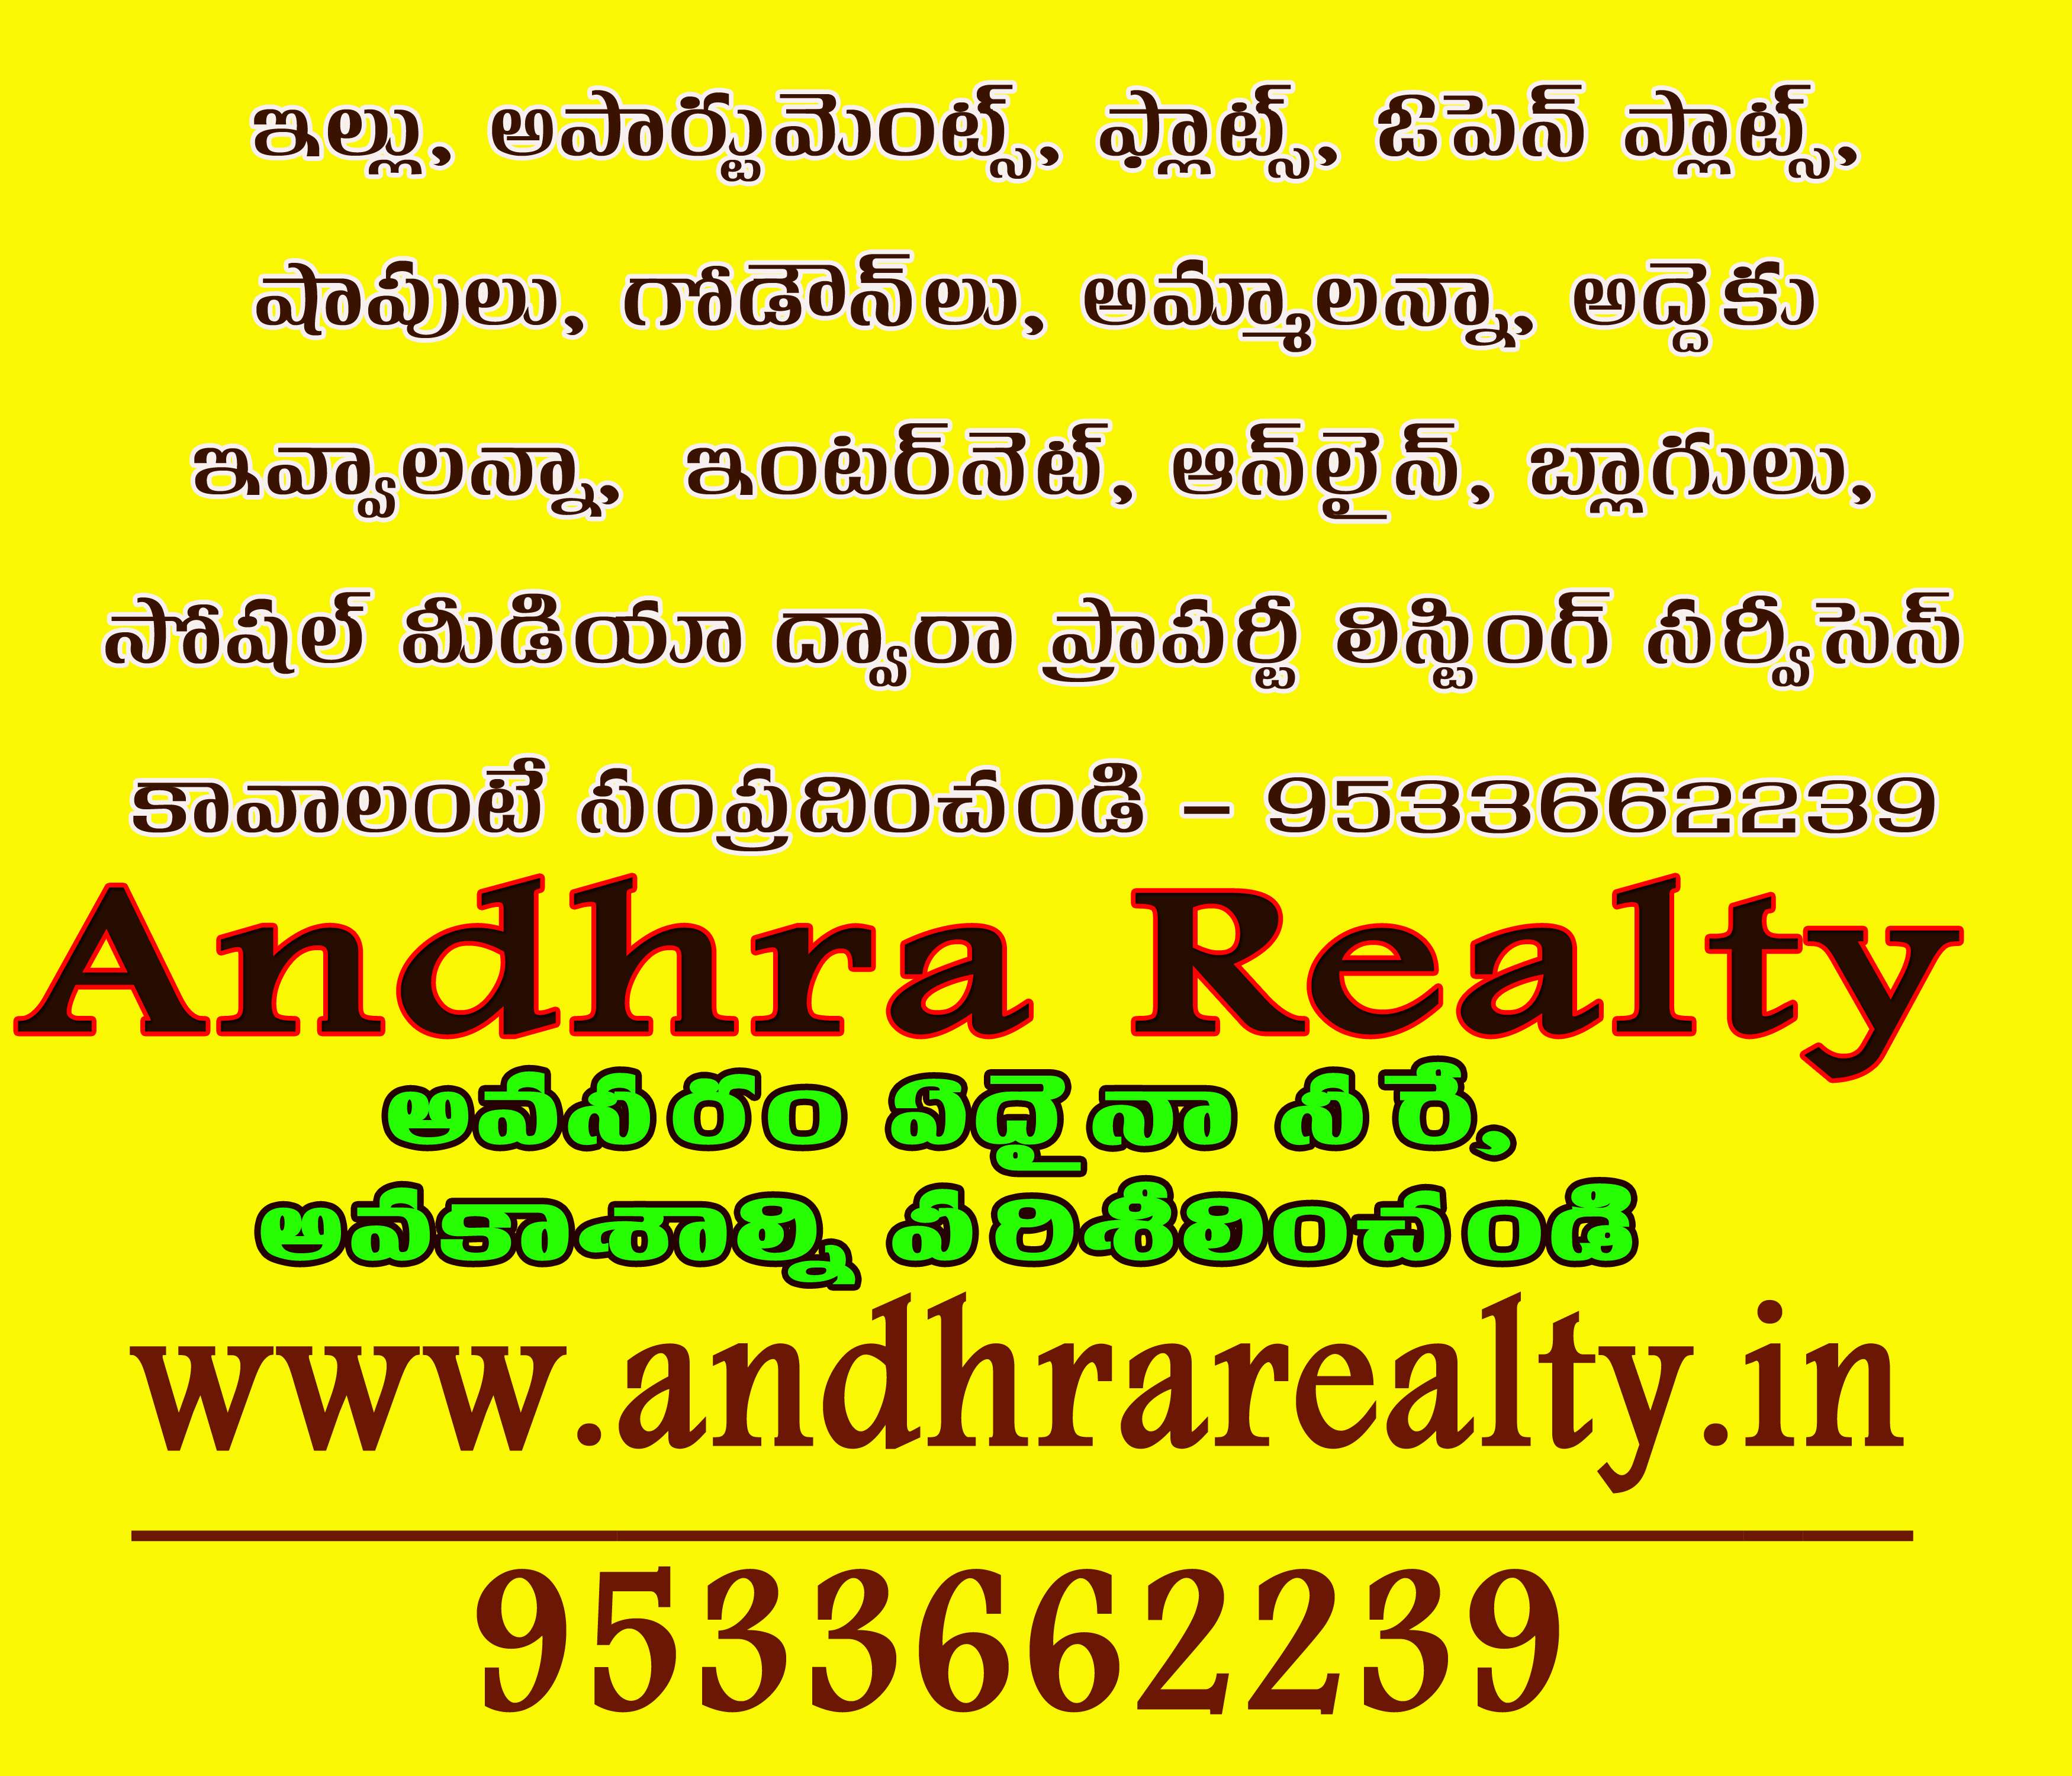 Andhra Realty Management Services